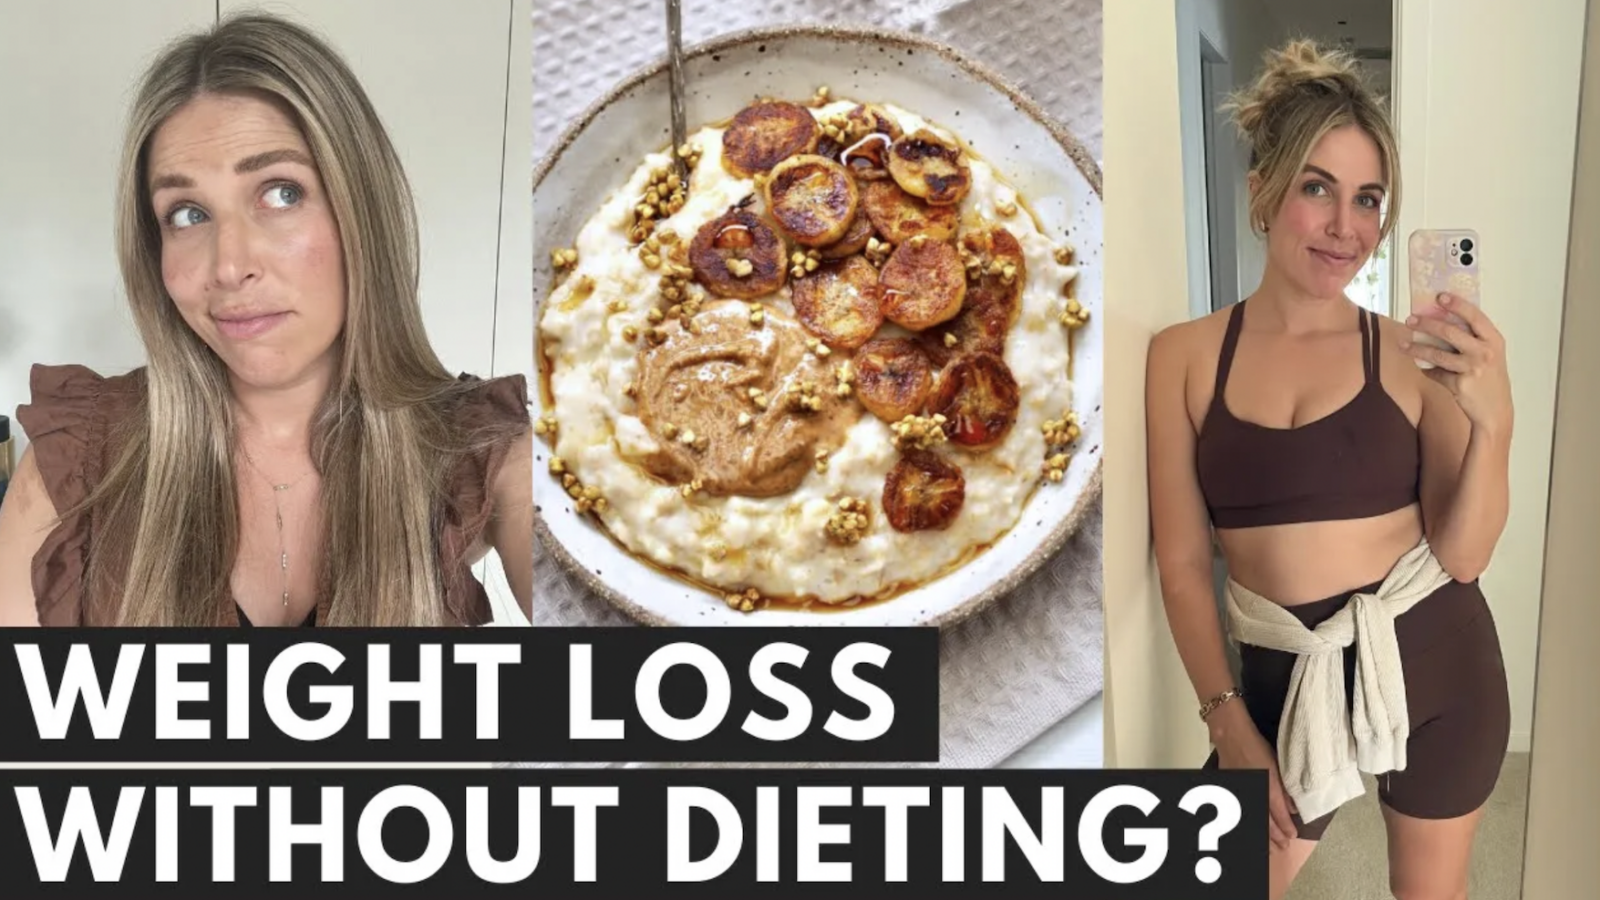 I stopped dieting and lost weight YouTube vieo